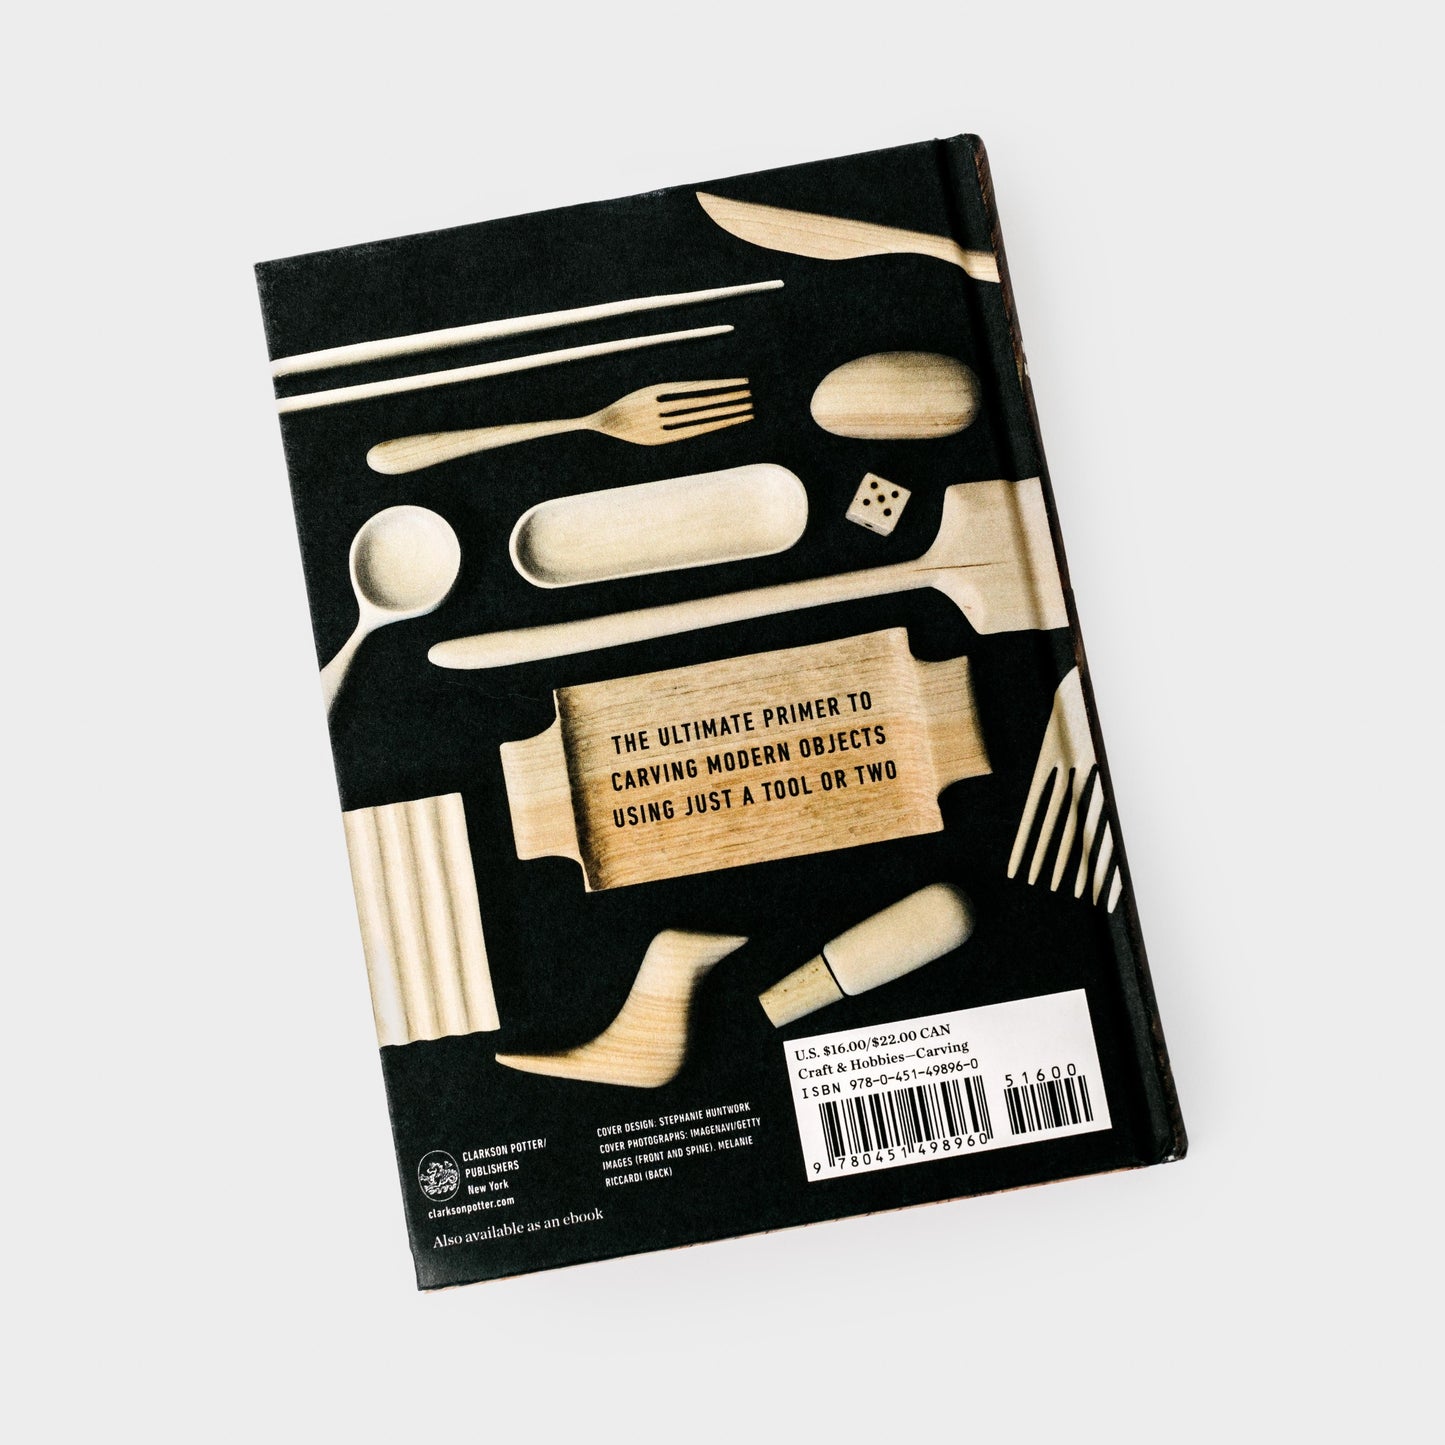 Carve, A Simple Guide to Whittling Book by Melanie Abrantes.